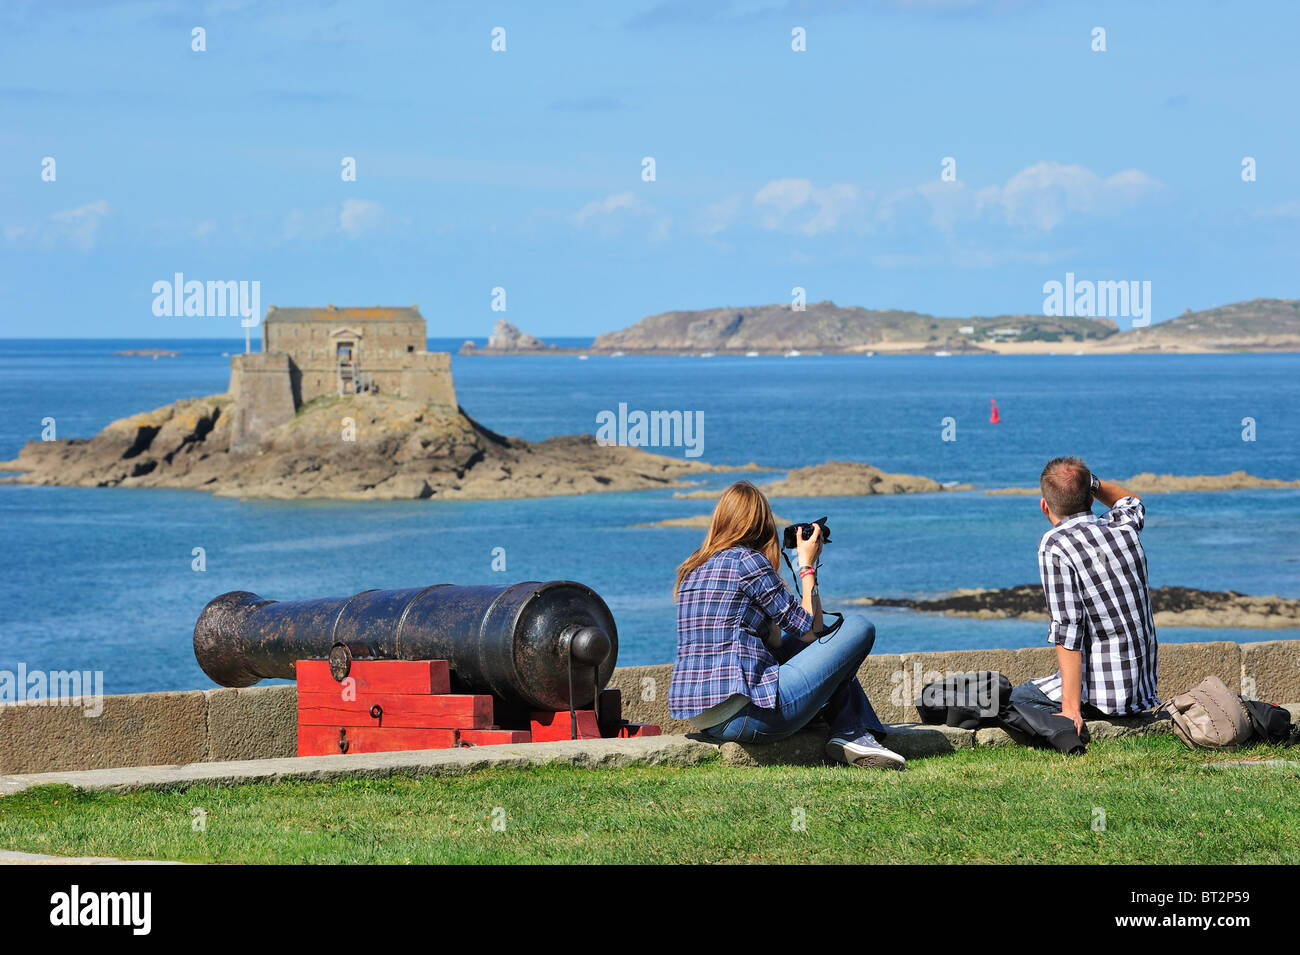 Old cannon at rampart and tourists lookig at fort Petit Bé in the sea at Saint-Malo, Brittany, France Stock Photo